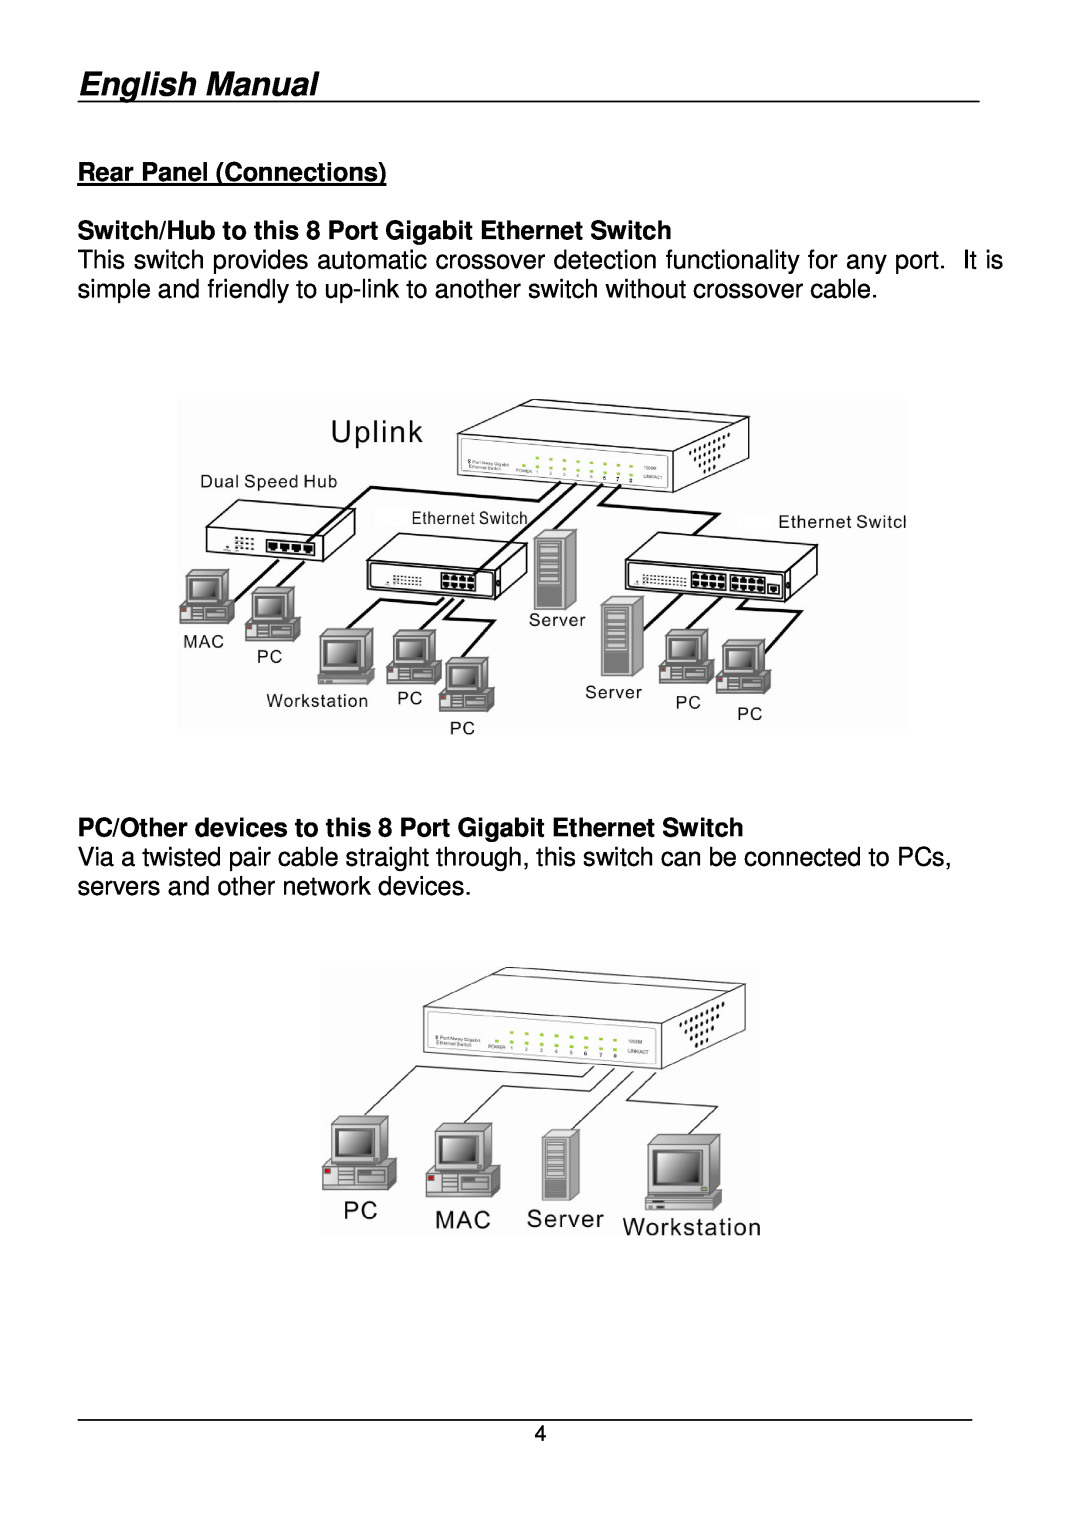 Lindy 25045 user manual English Manual, Rear Panel Connections, Switch/Hub to this 8 Port Gigabit Ethernet Switch 